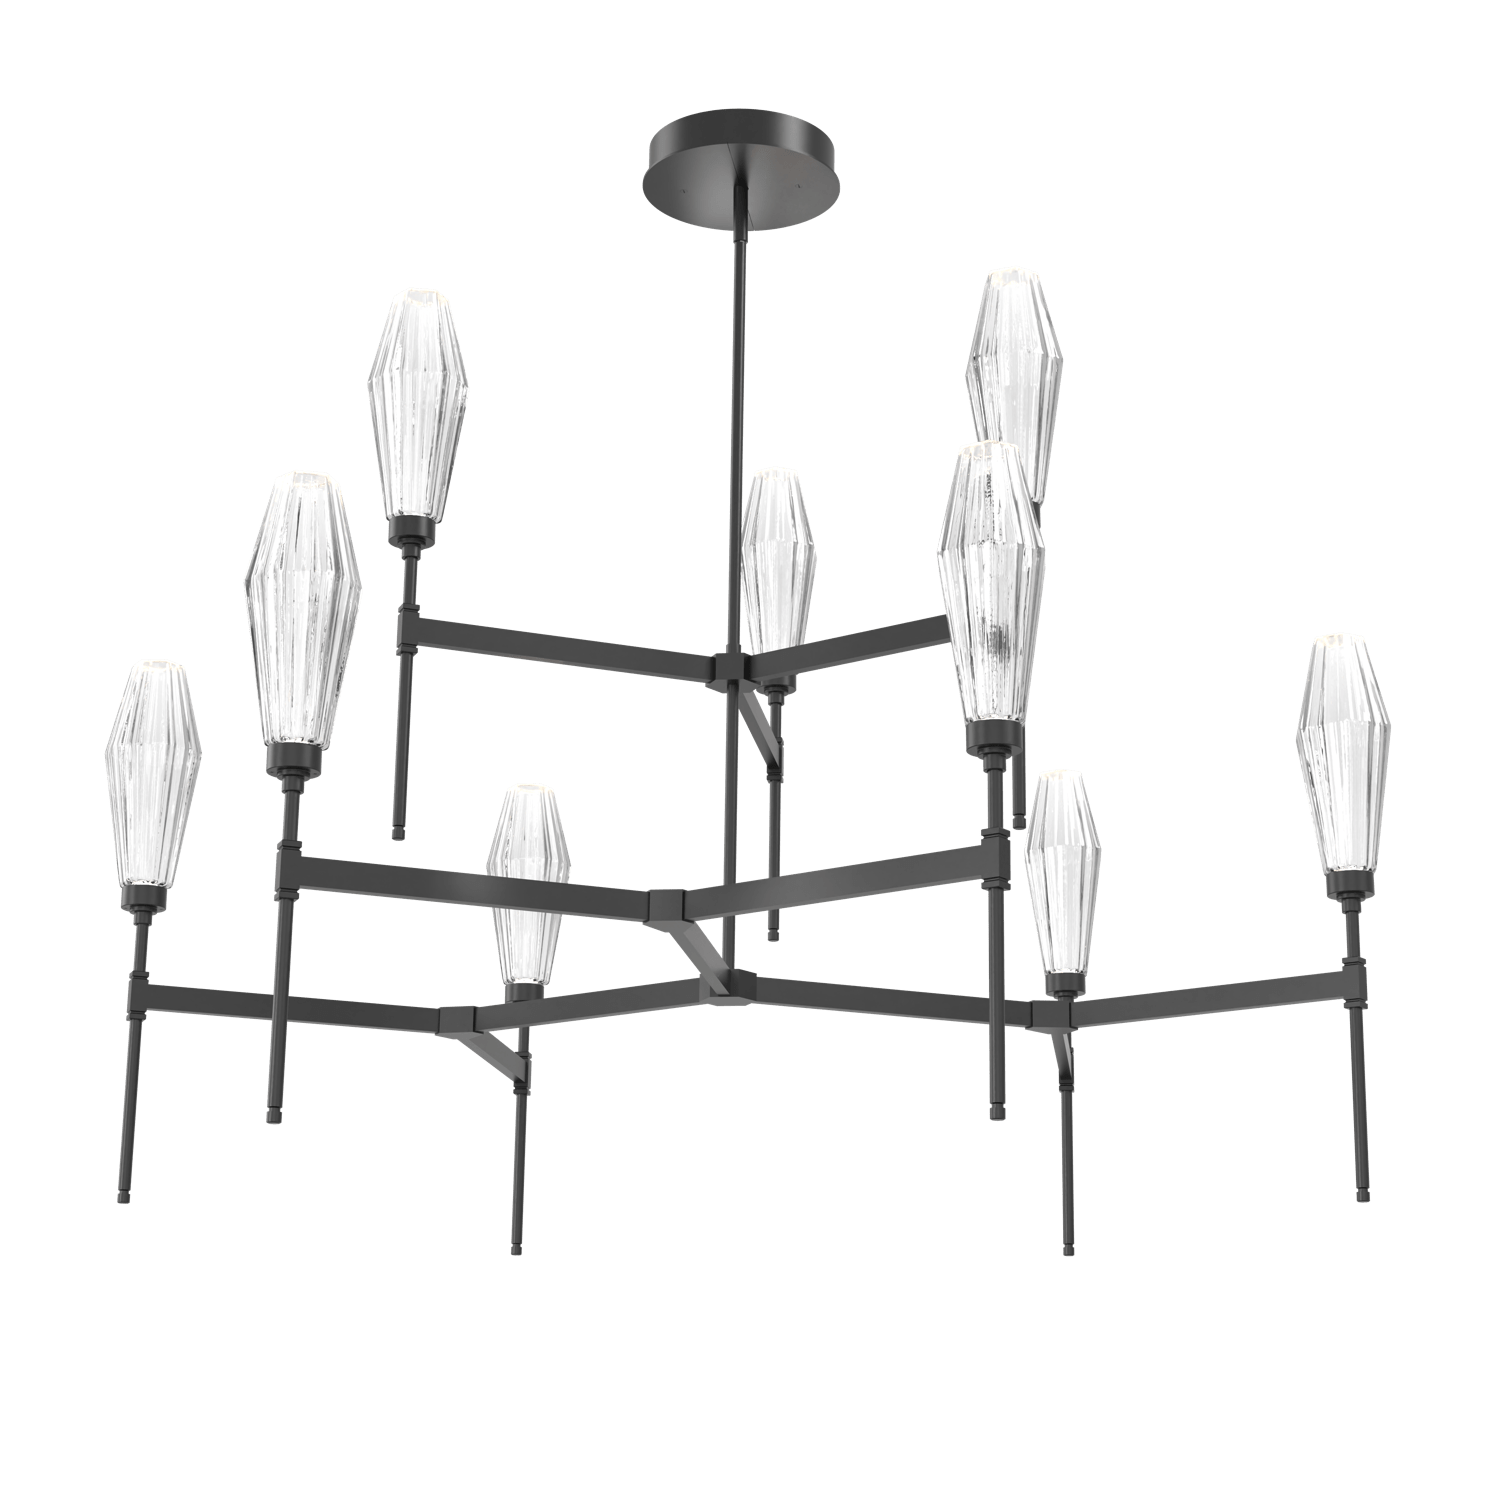 CHB0049-54-MB-RC-Hammerton-Studio-Aalto-54-inch-round-two-tier-belvedere-chandelier-with-matte-black-finish-and-optic-ribbed-clear-glass-shades-and-LED-lamping